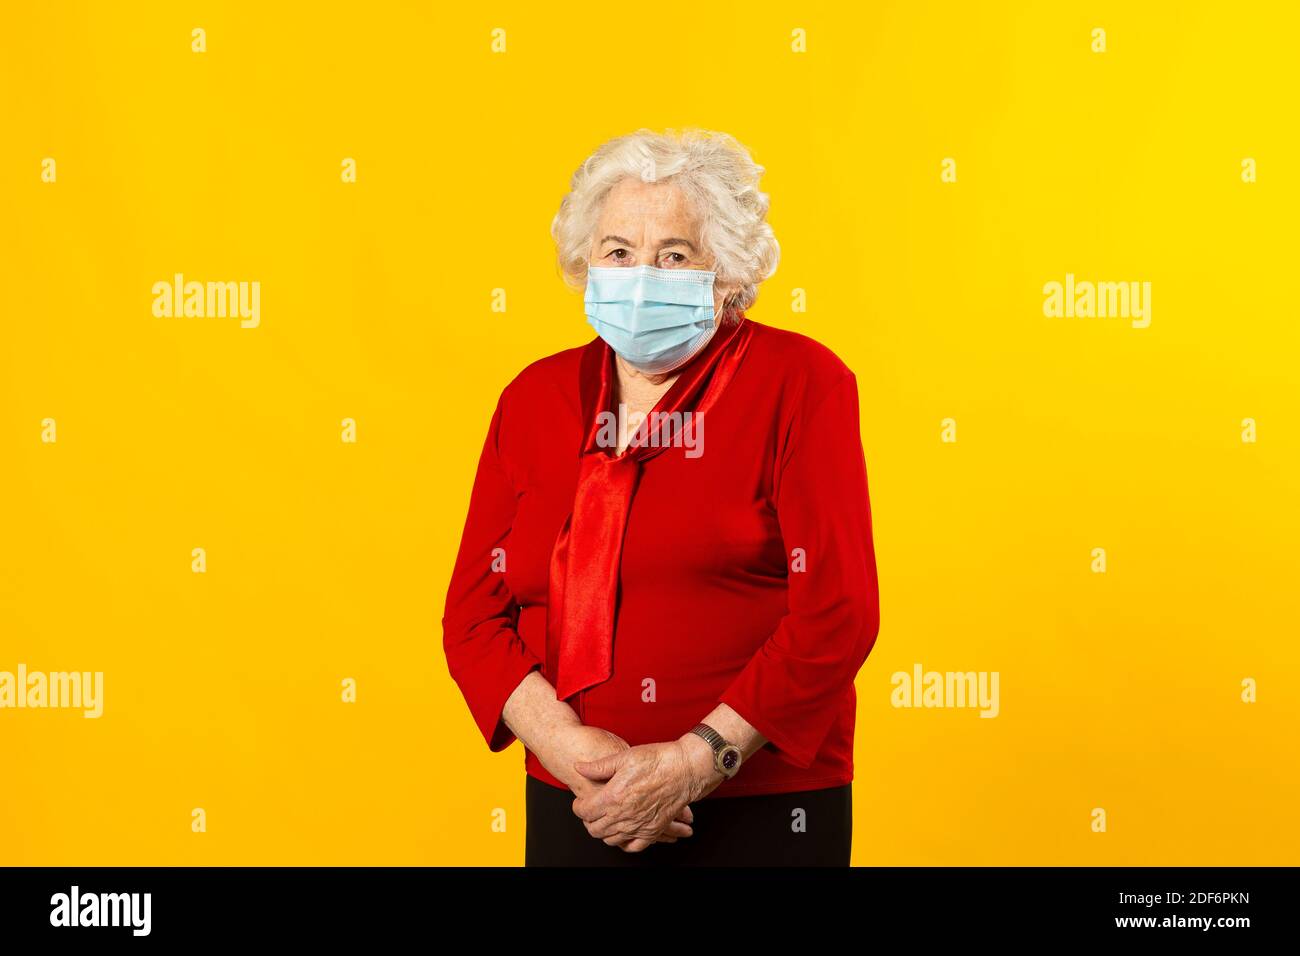 Studio portrait of a senior woman wearing a red shirt and a surgical facial mask, against a yellow background Stock Photo